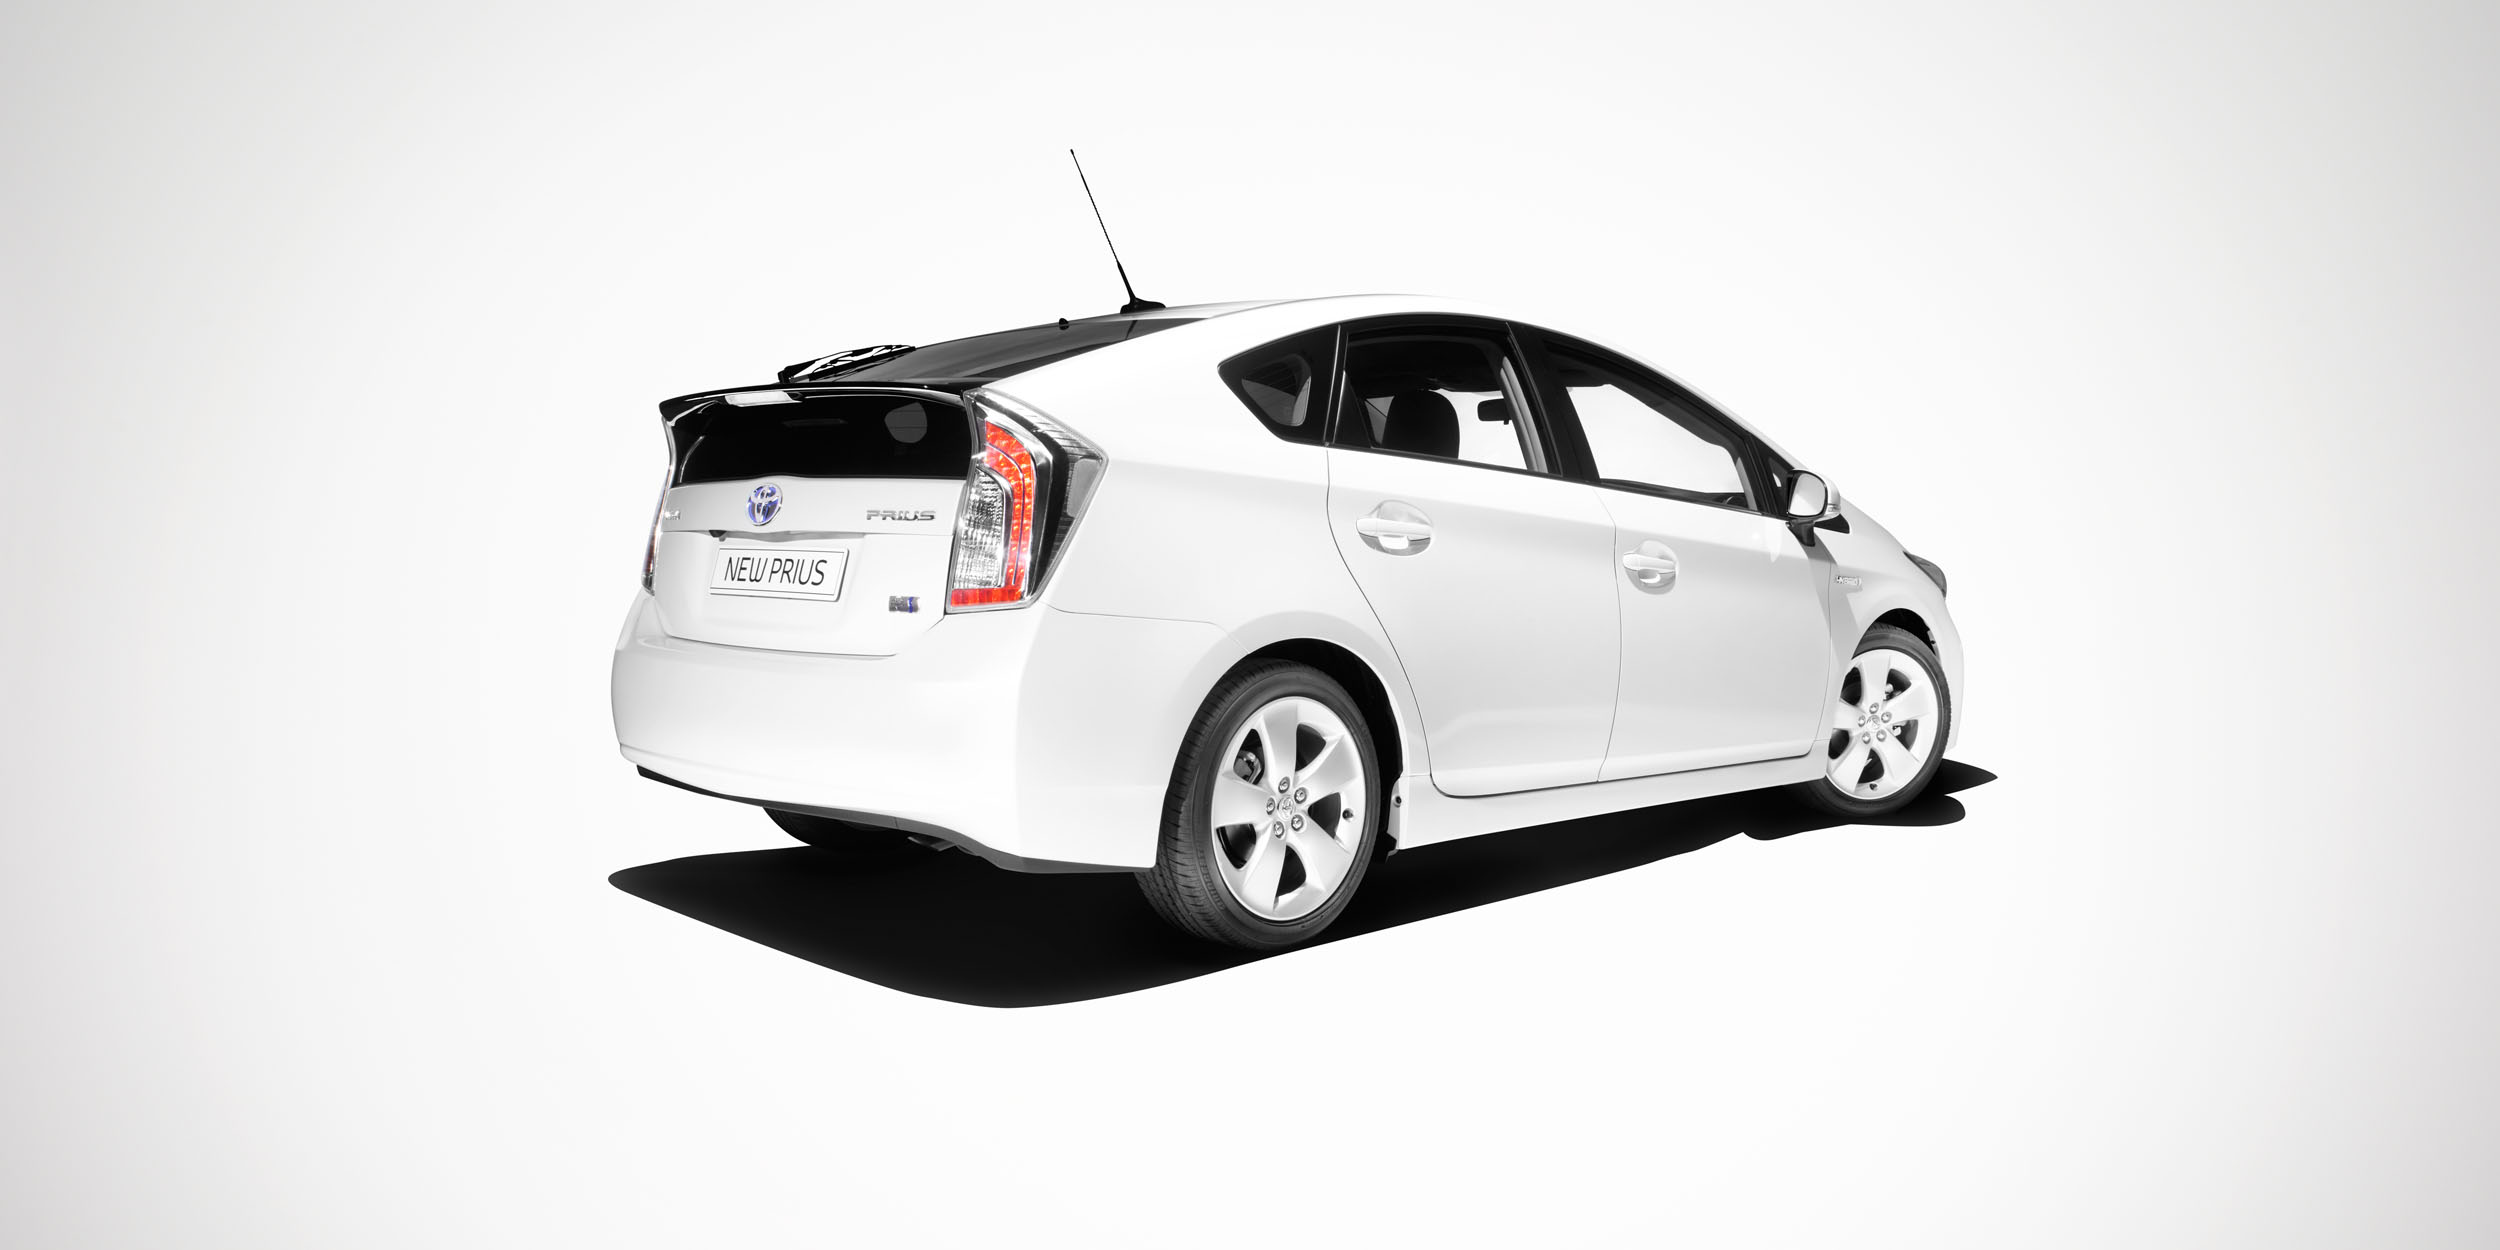 Toyota Prius by Alexander Kent London based still life and product photographer.